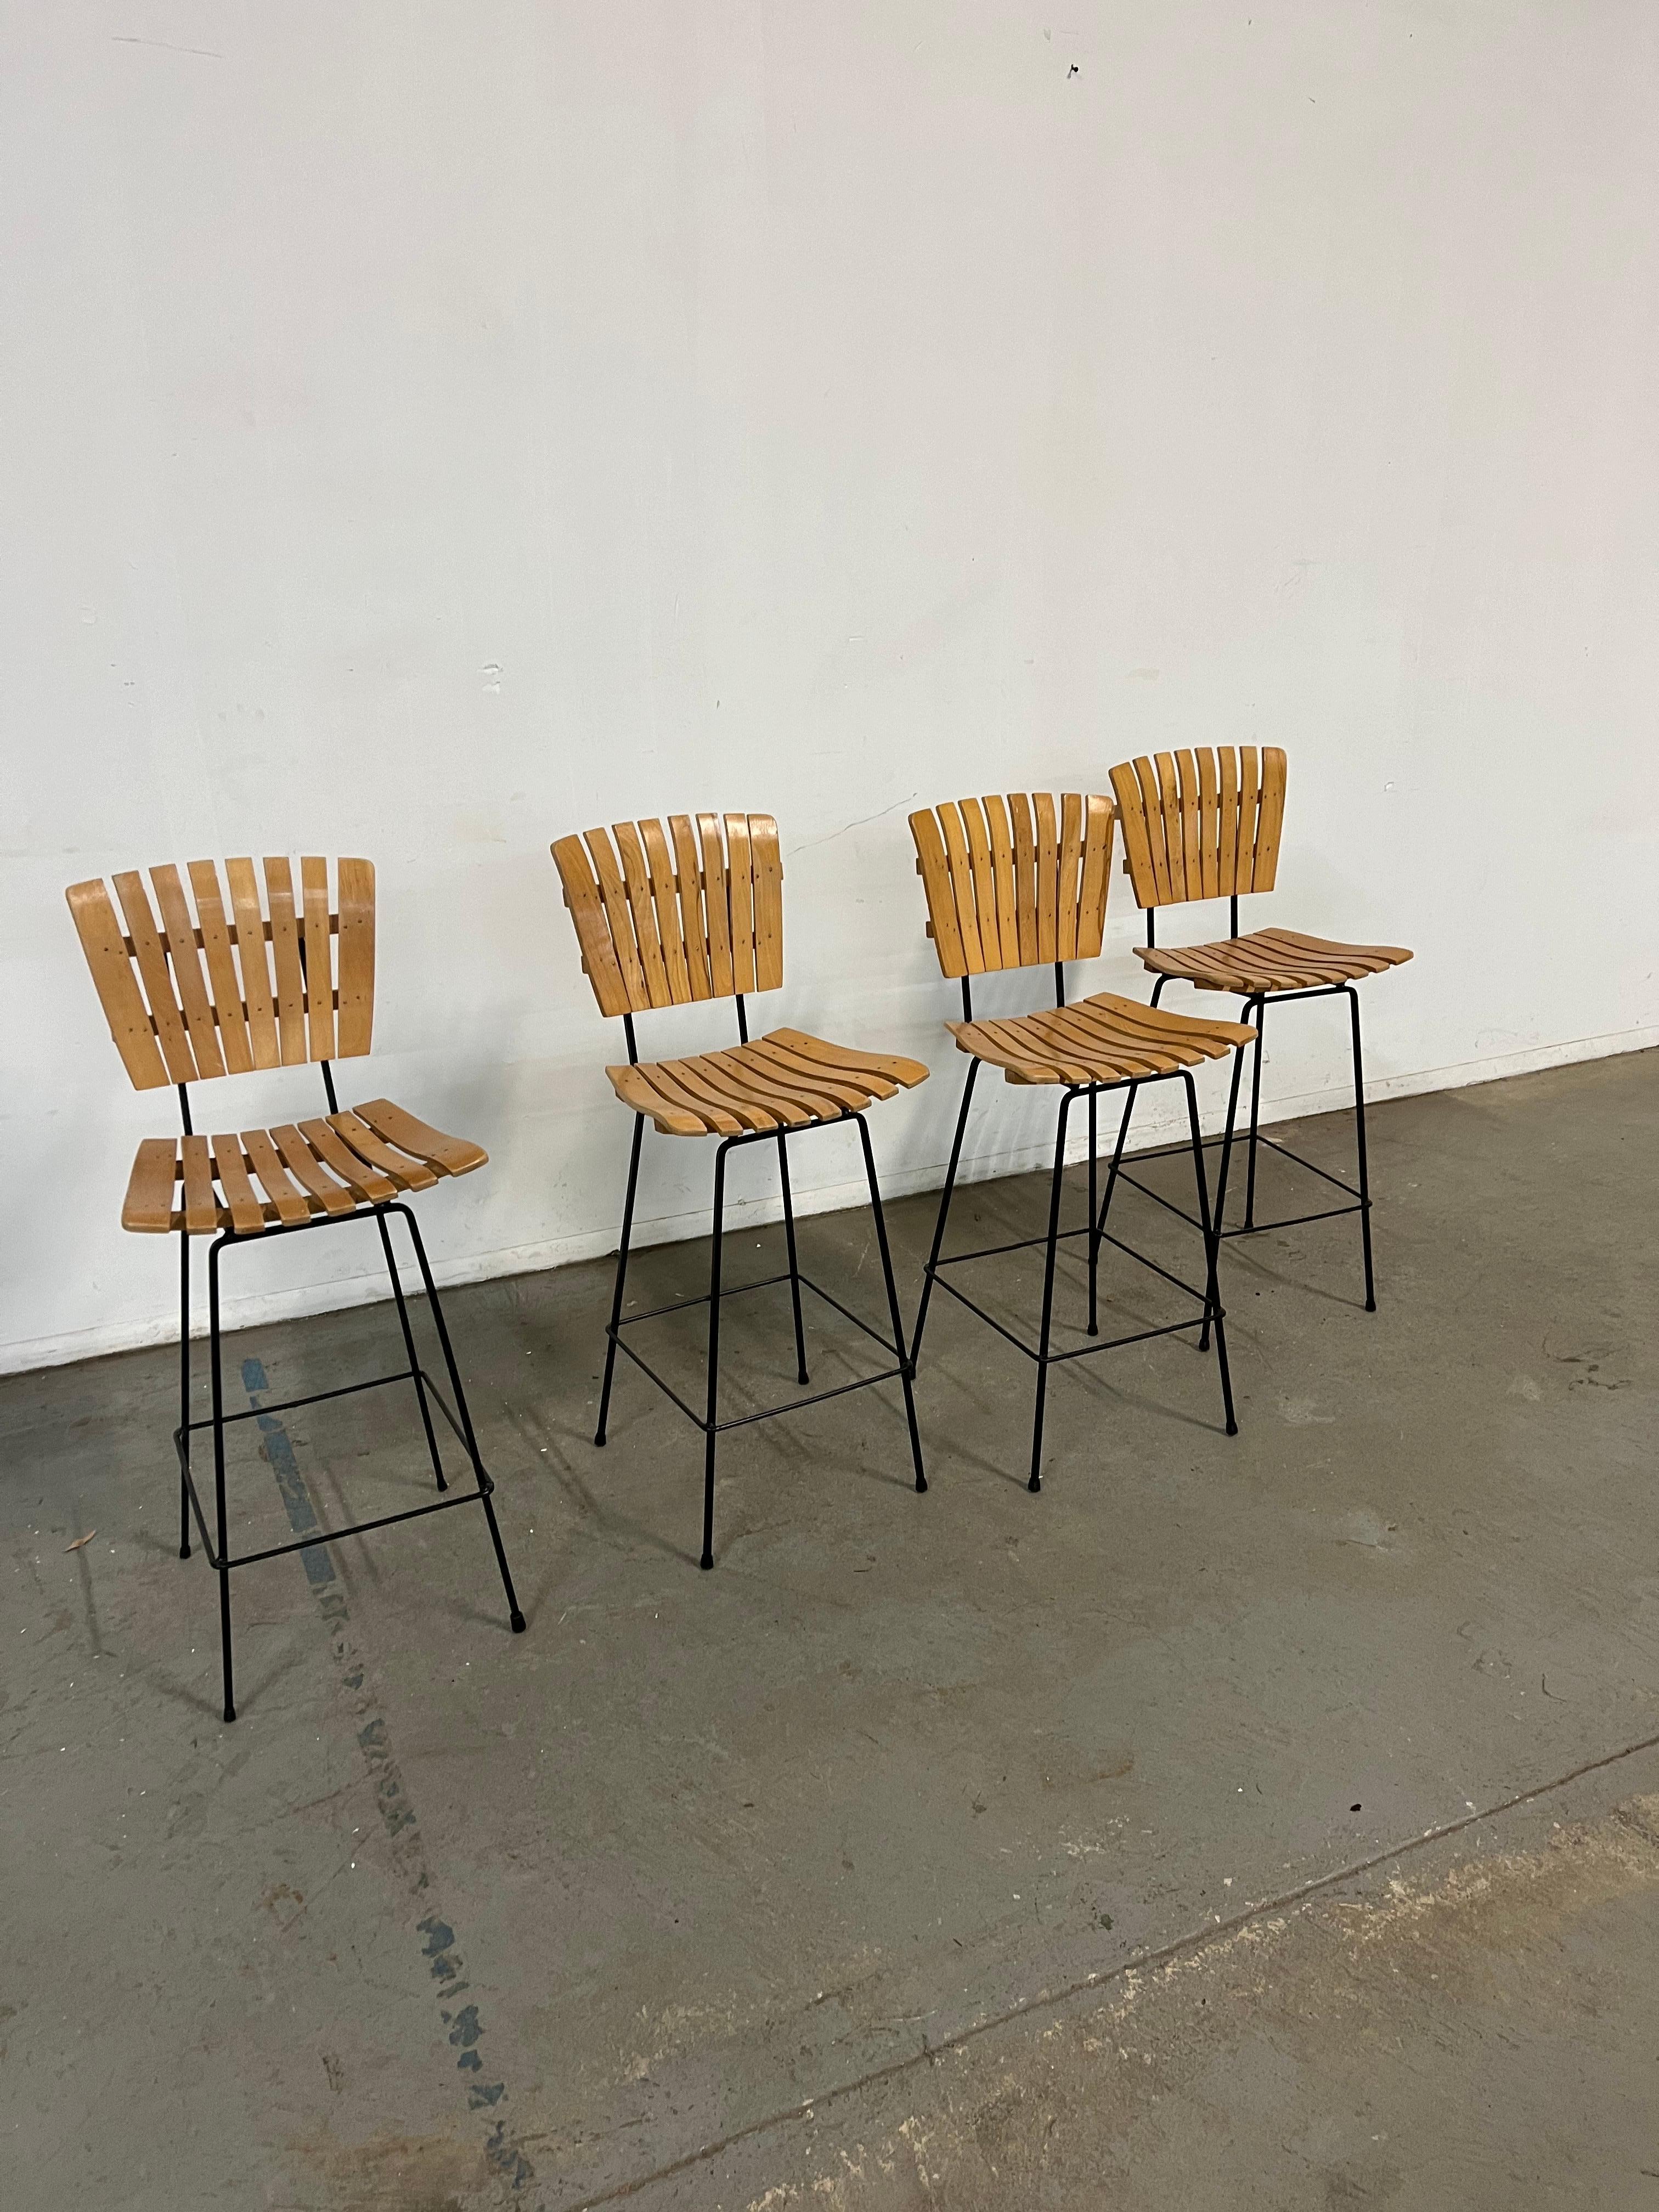 Set of 4 Mid-Century Arthur Umanoff Slat Style Bar Stools 

Offered is a great Set of 4 Mid-Century Arthur Umanoff Slat Style Bar Stools . They have the simple lines and design seen in this time period. They are in good condition for their age